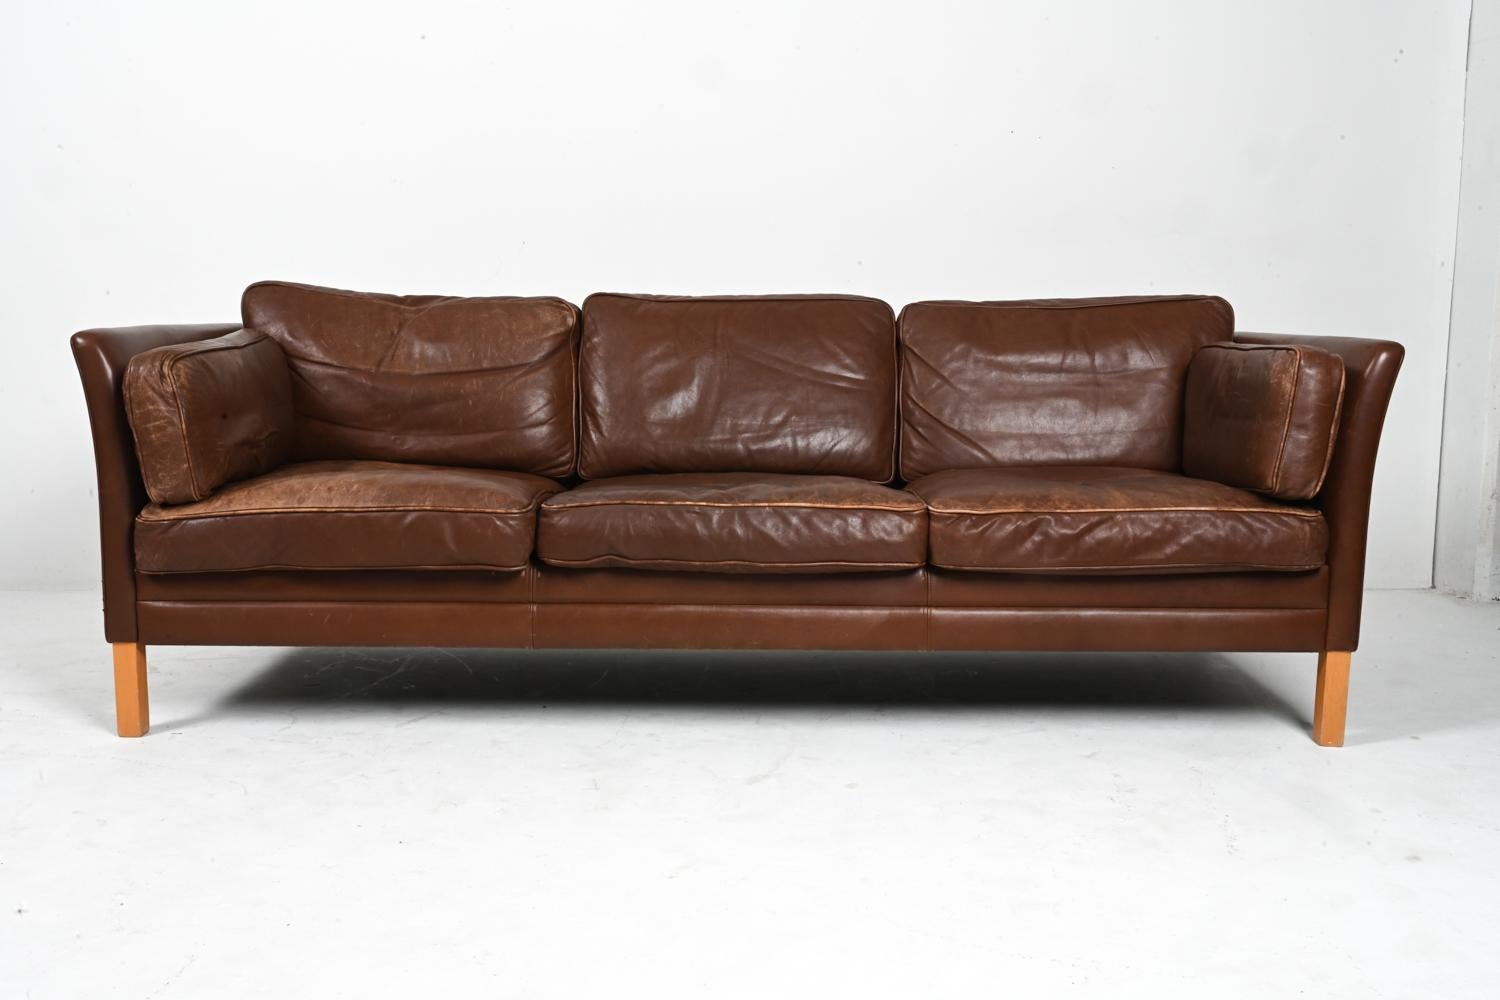 Danish Modern Leather & Beech Three-Seat Sofa by Mogens Hansen In Good Condition For Sale In Norwalk, CT